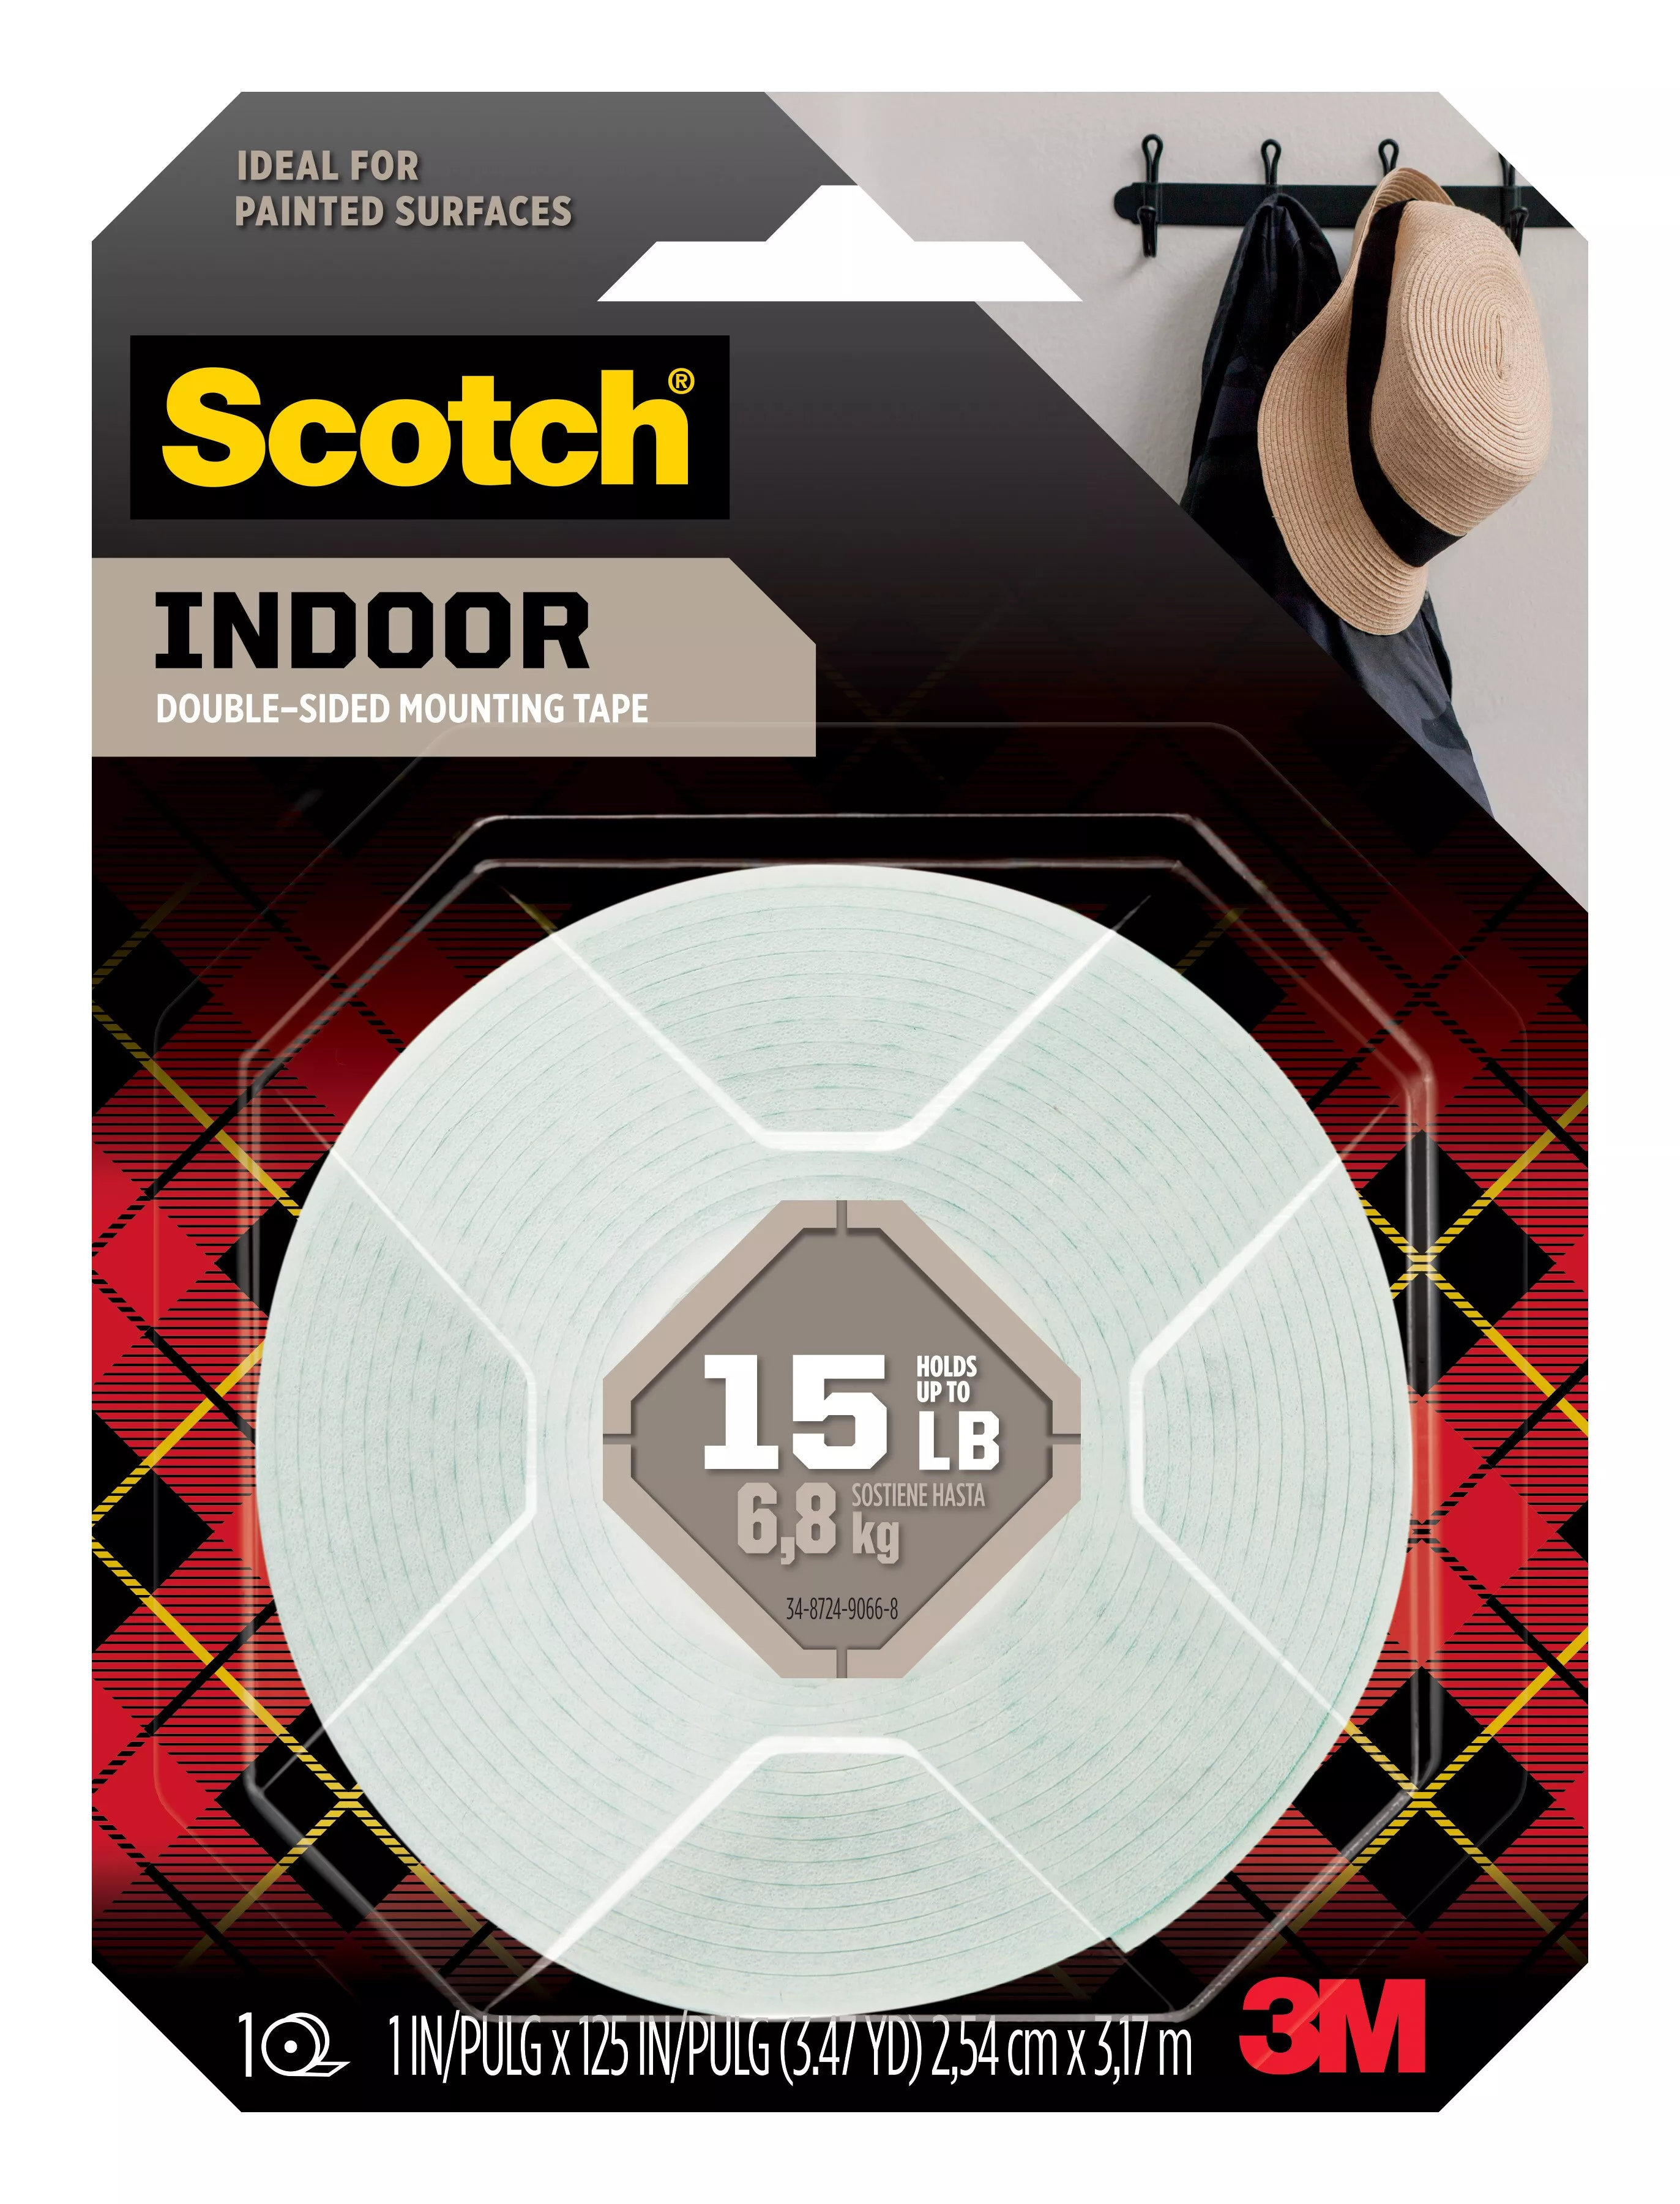 Scotch® Indoor Double-Sided Mounting Tape 314S-MED, 1 in x 125 in (2.54 cm x 3.17 m)